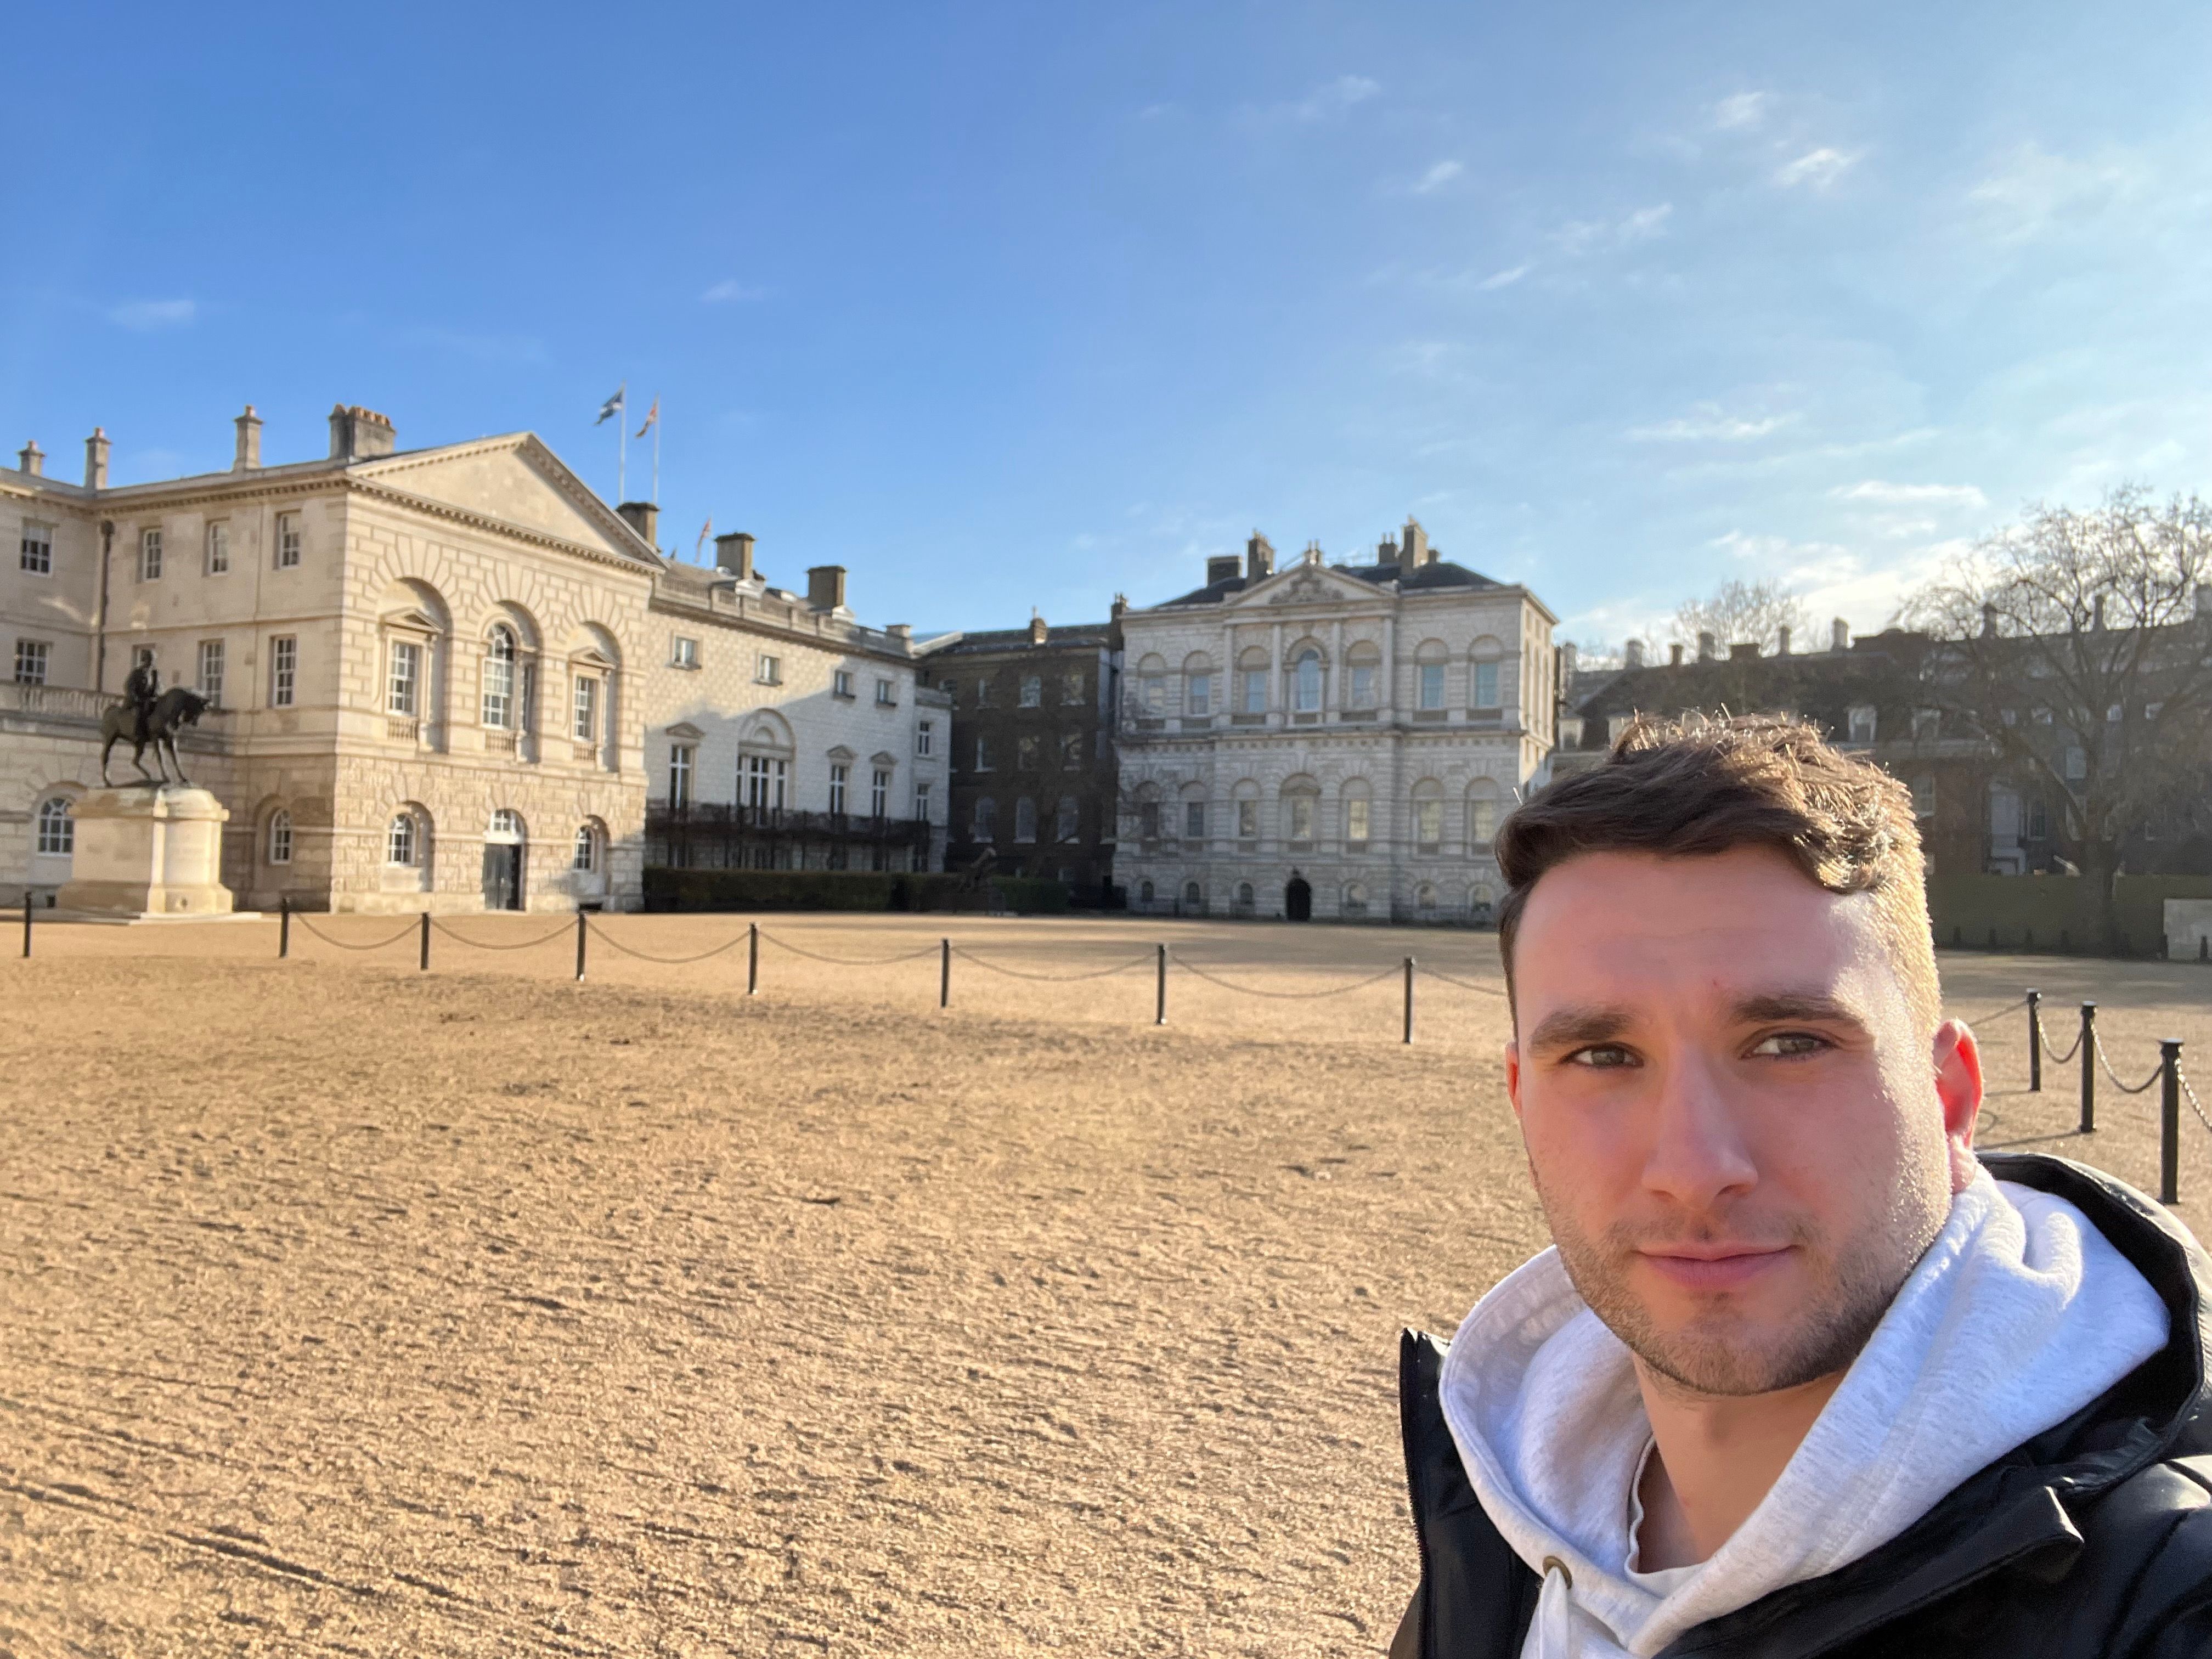 Guy visiting Horse Guards Parade in Central London on a sunny day